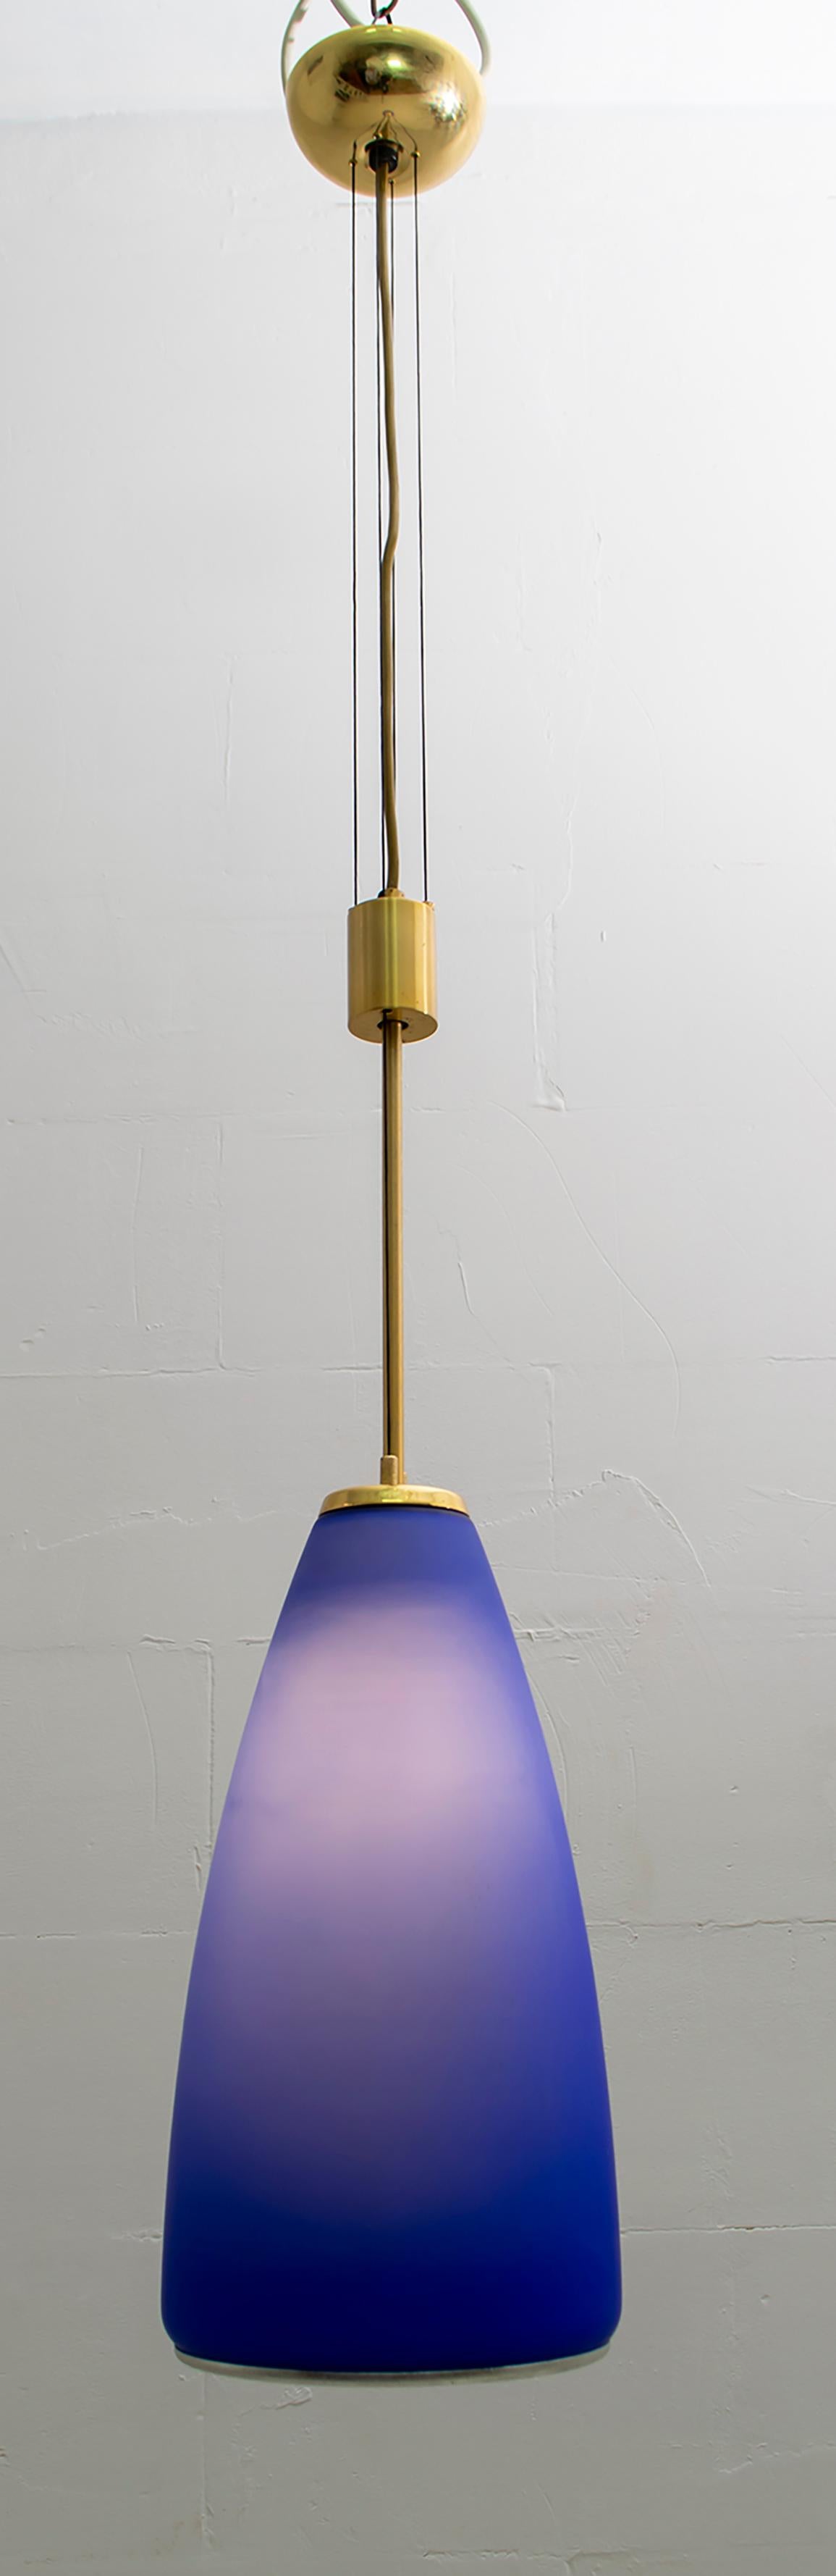 This pair of pendants light were created by Lamiprogetti in the 1980s, made of jacketed Murano glass, the structure is made of brass and has a system of salts and internal light descents, as shown in the photo.

